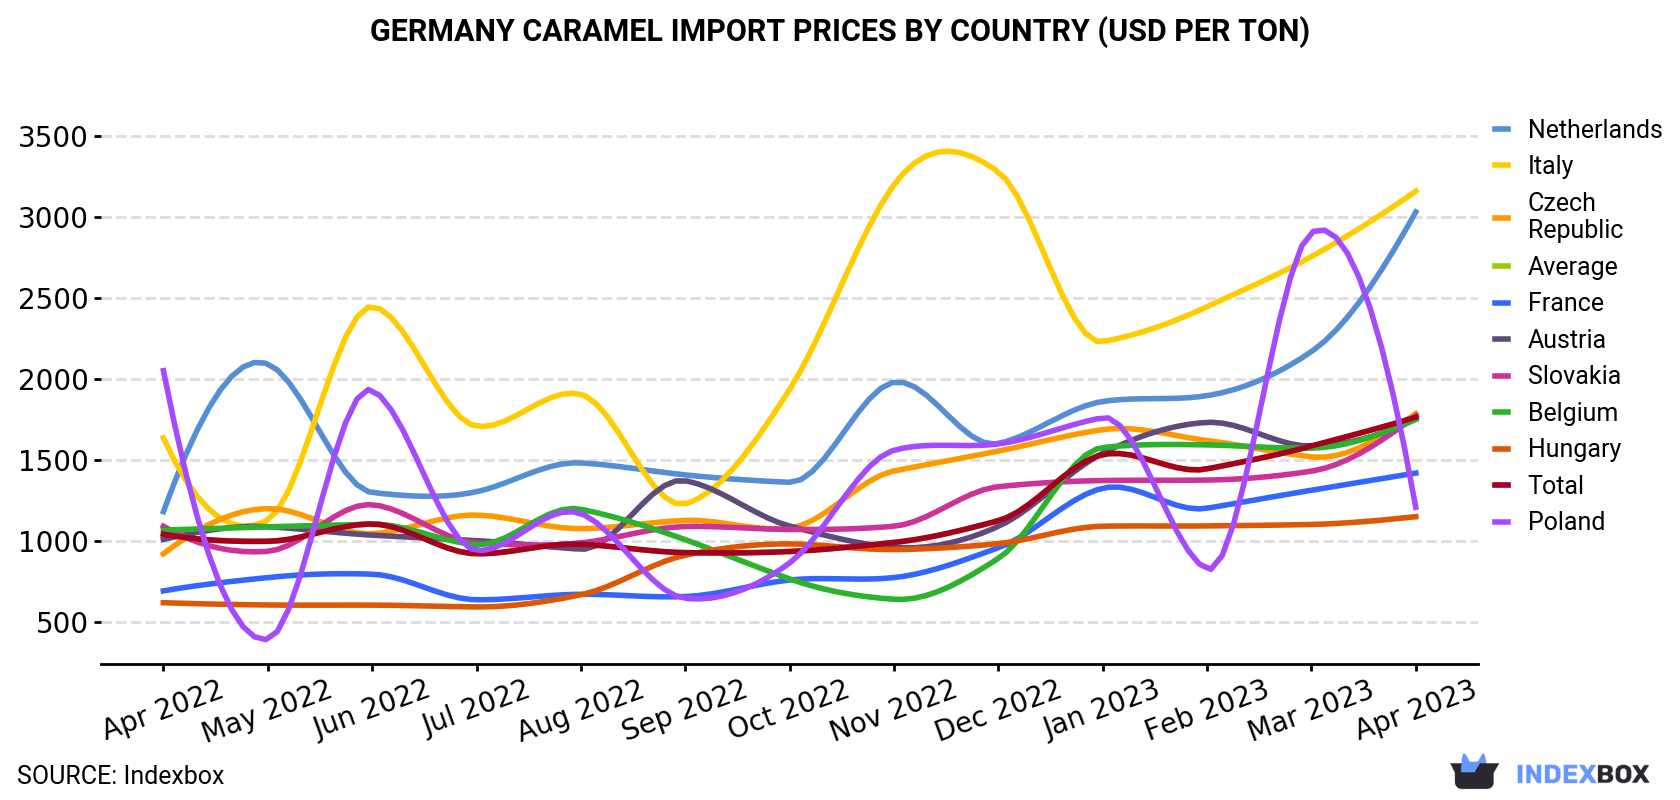 Germany Caramel Import Prices By Country (USD Per Ton)